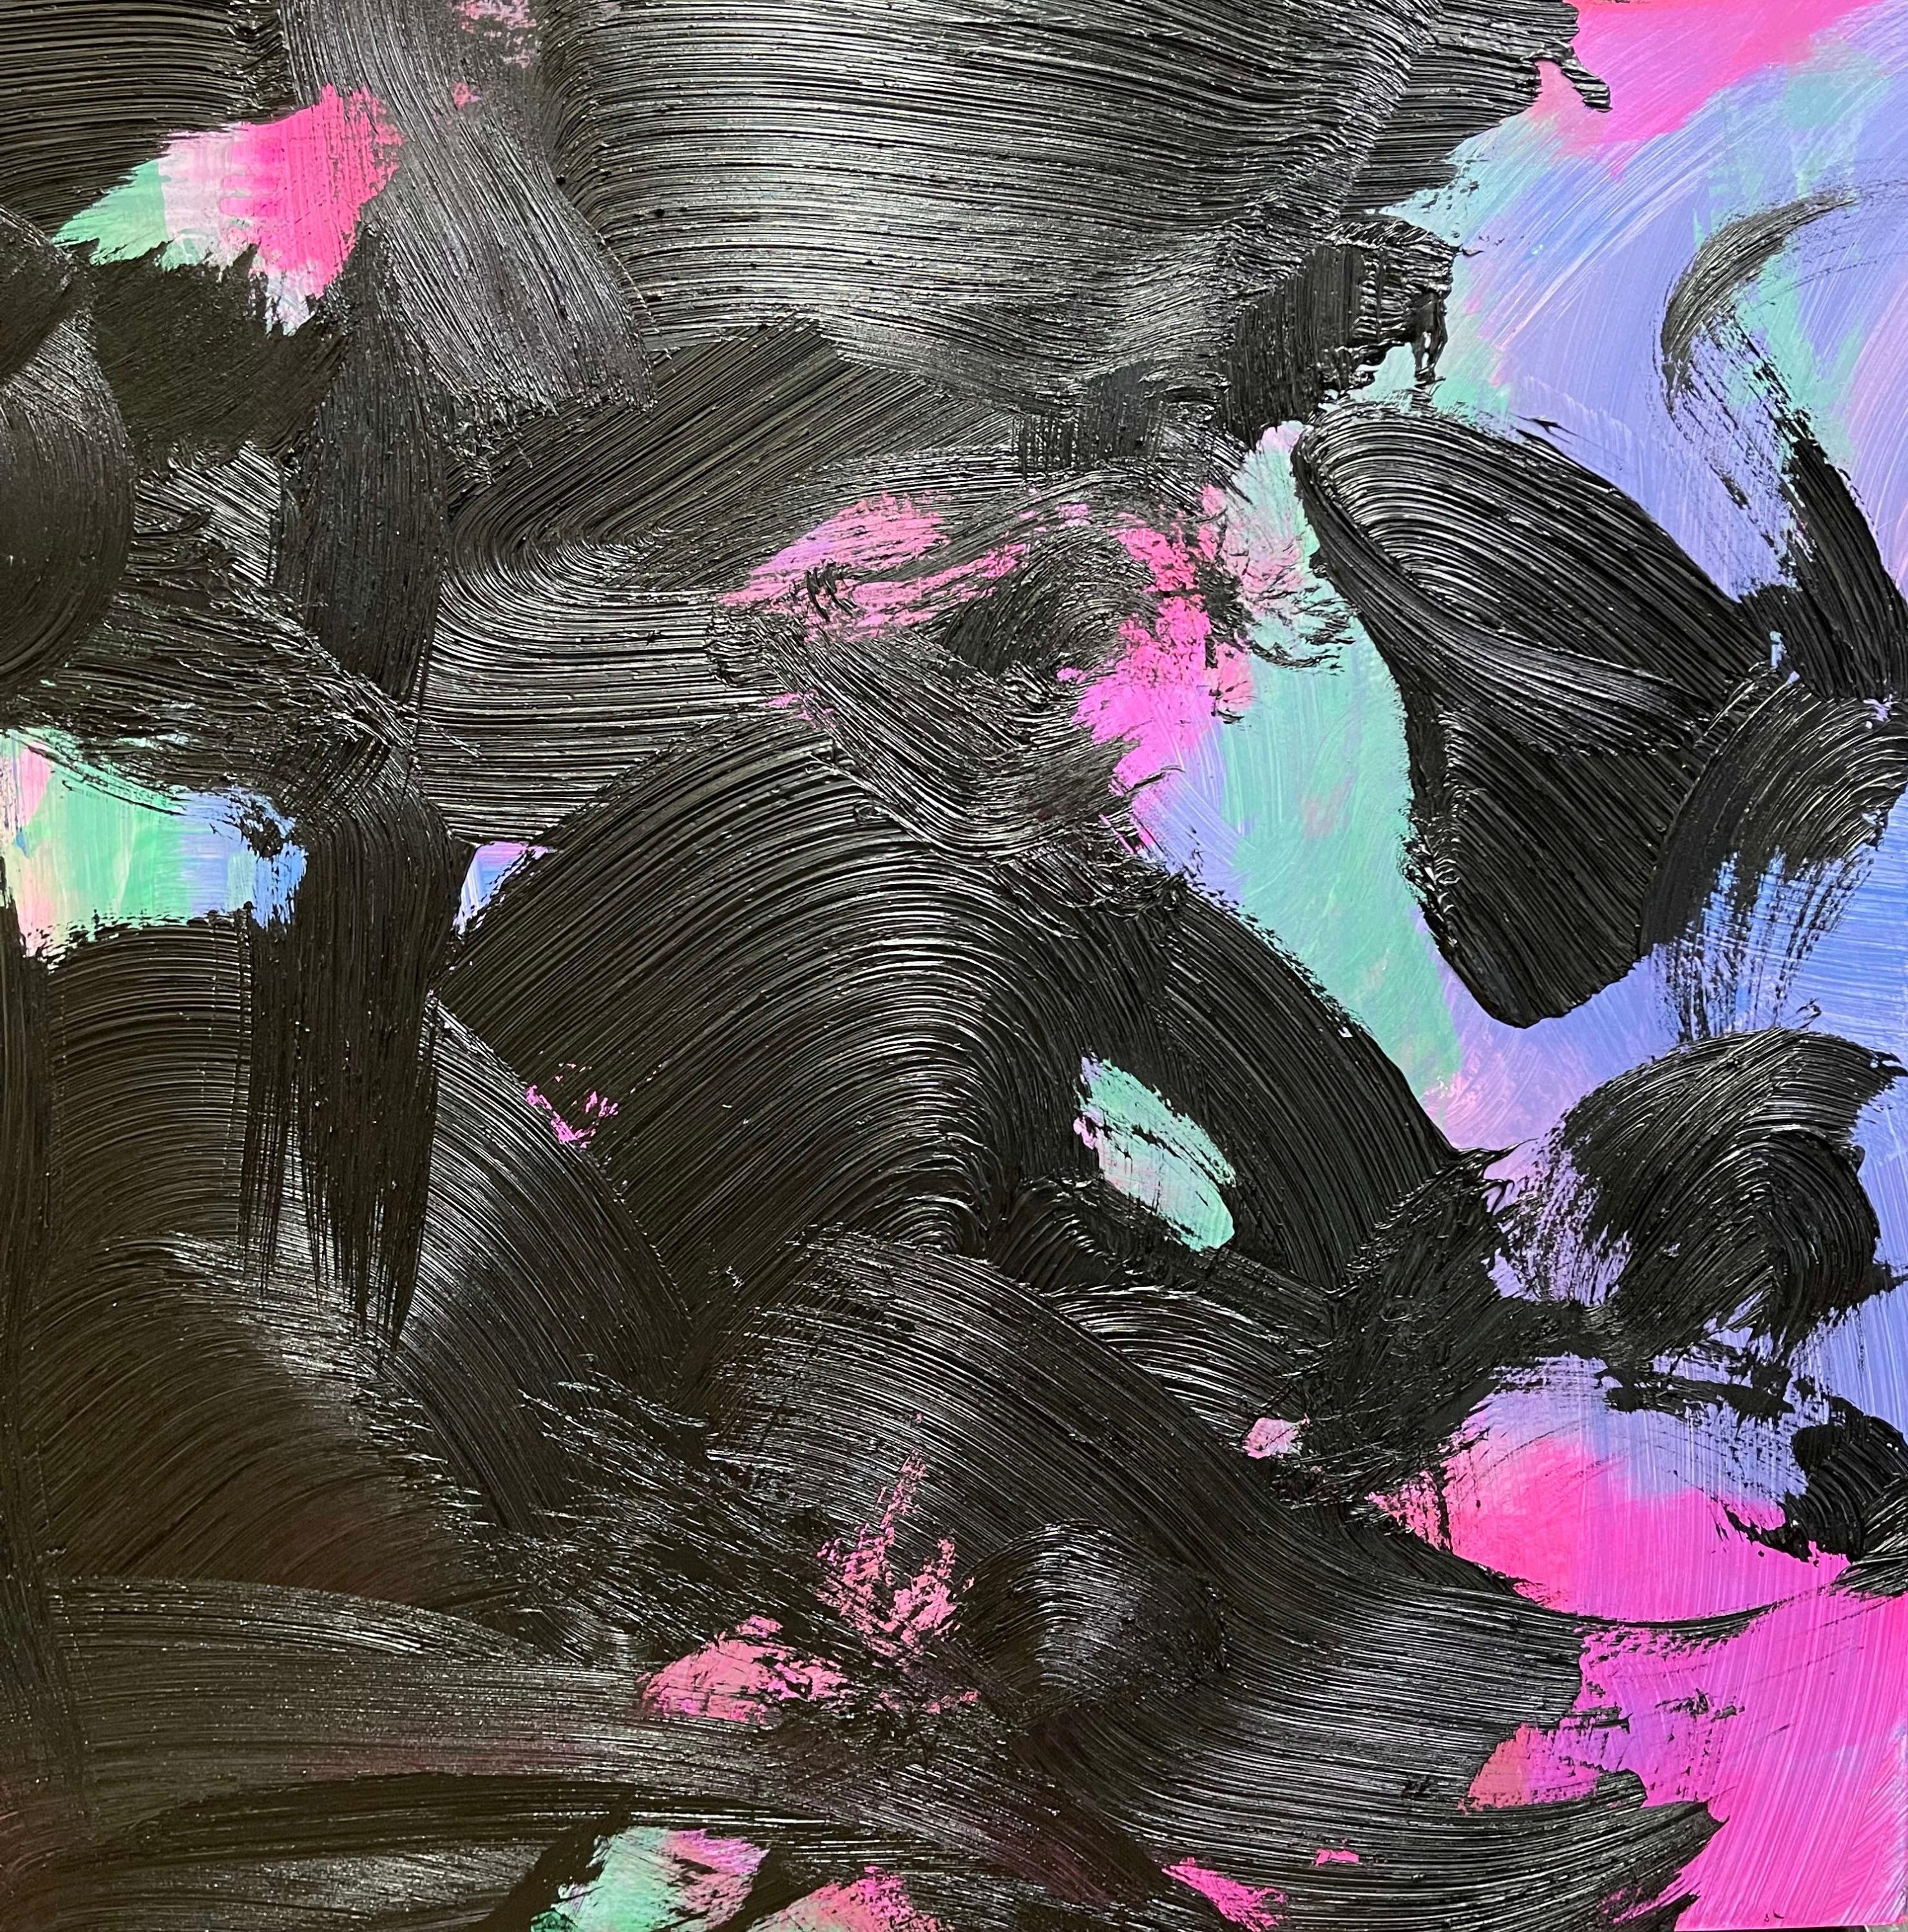 Undercolor 5-15-06 - Black, pink and purple abstract oil painting